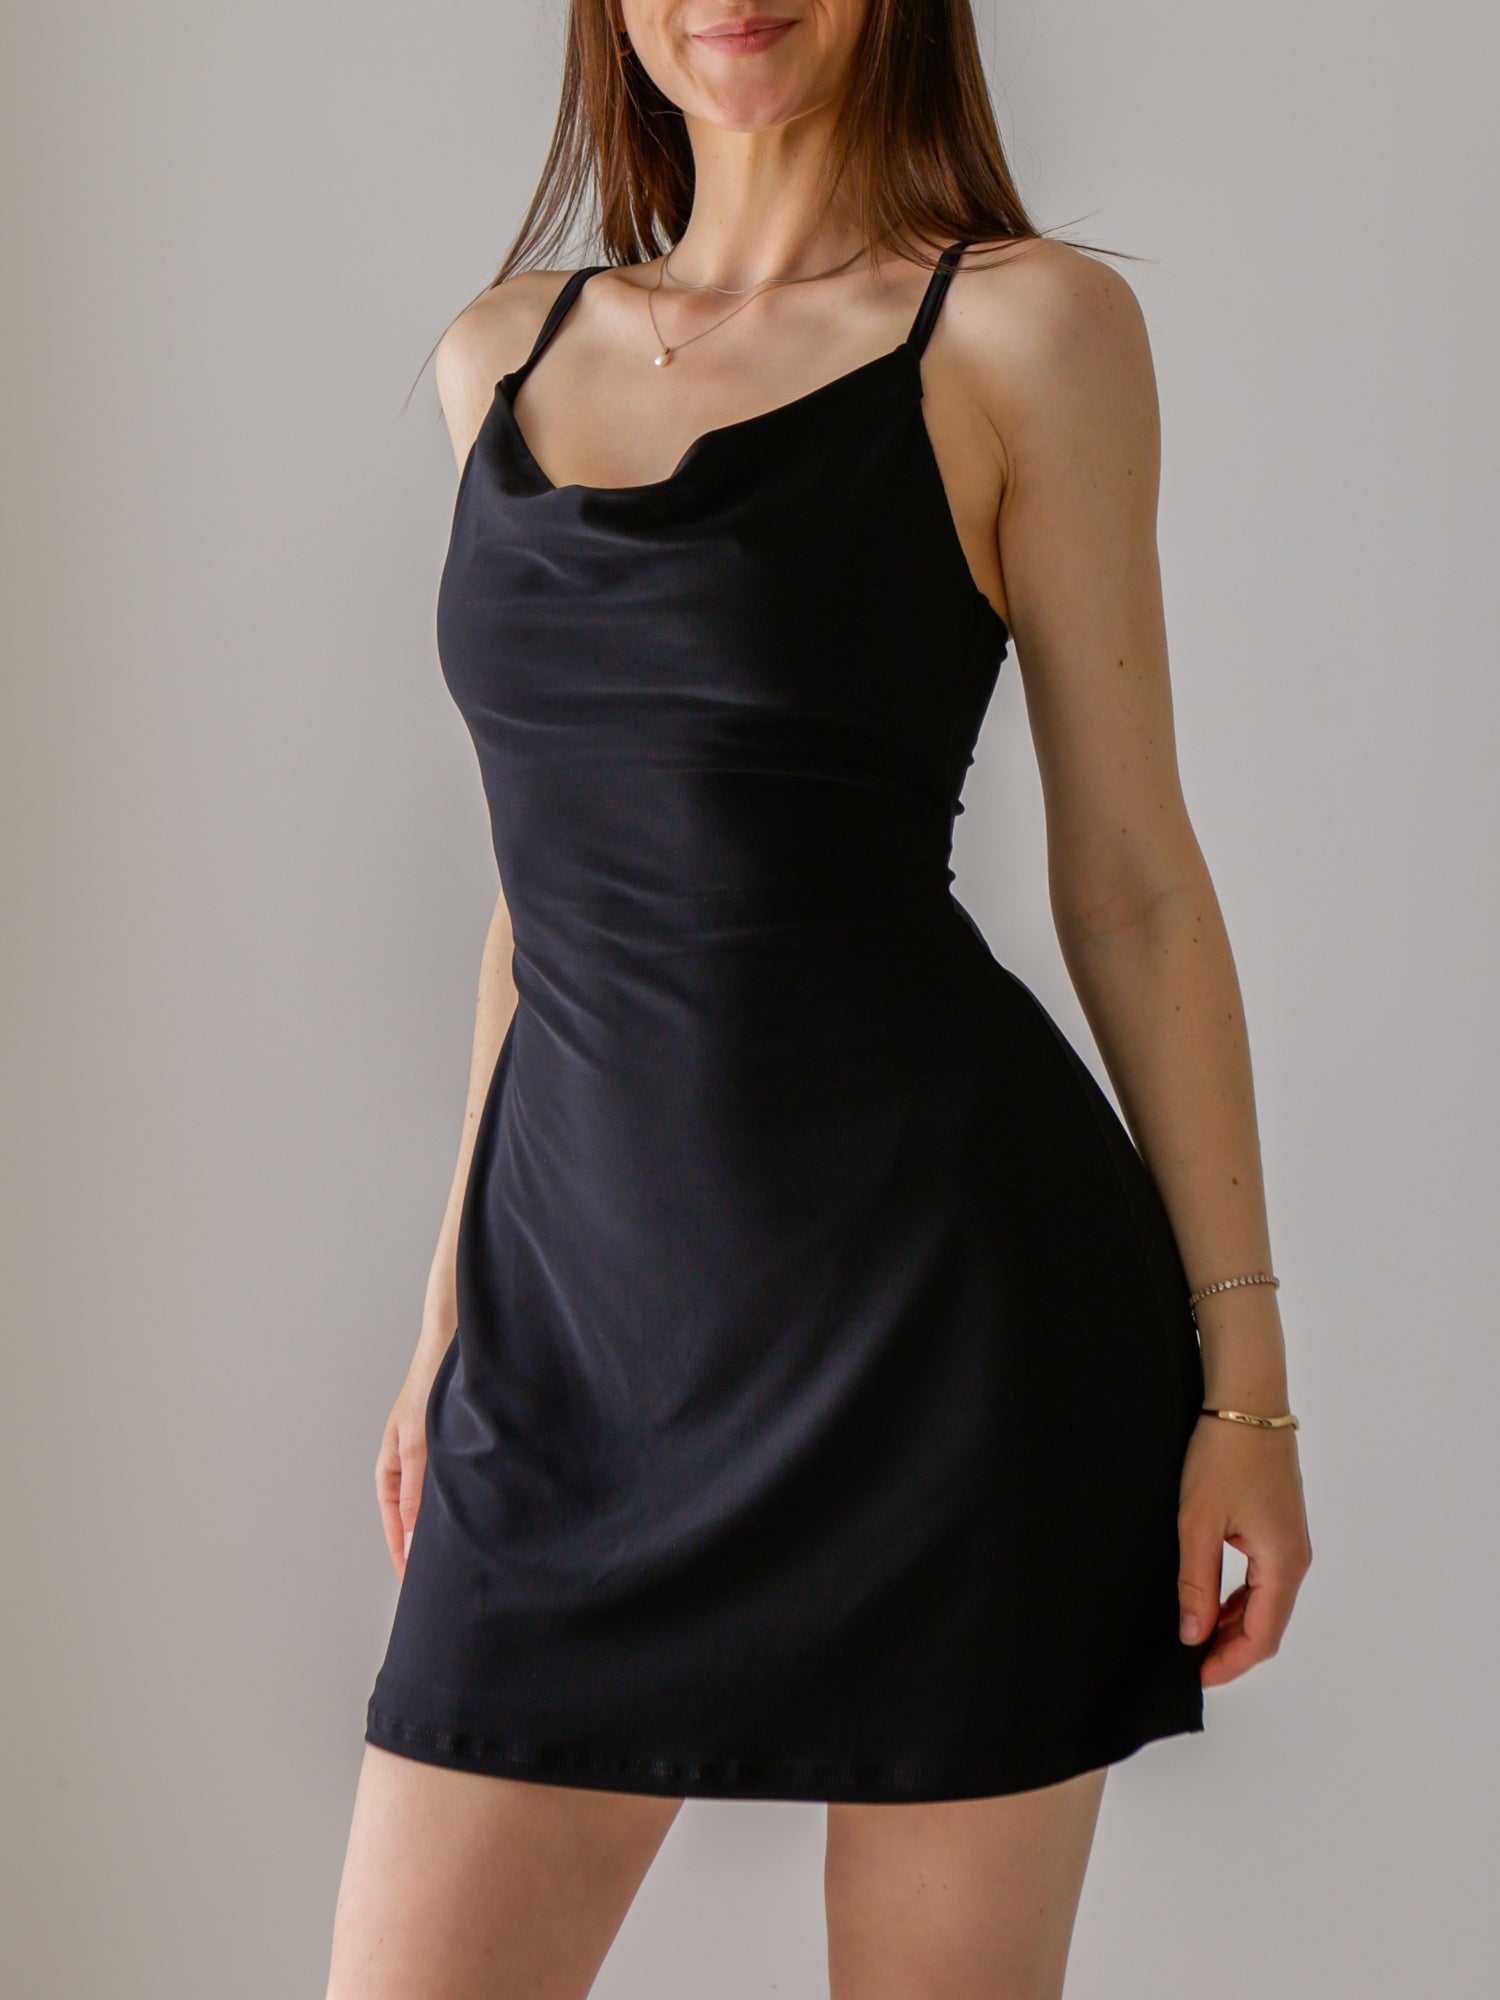 Eden Drape Mini Dress with Built-in-bra in Recycled ITY